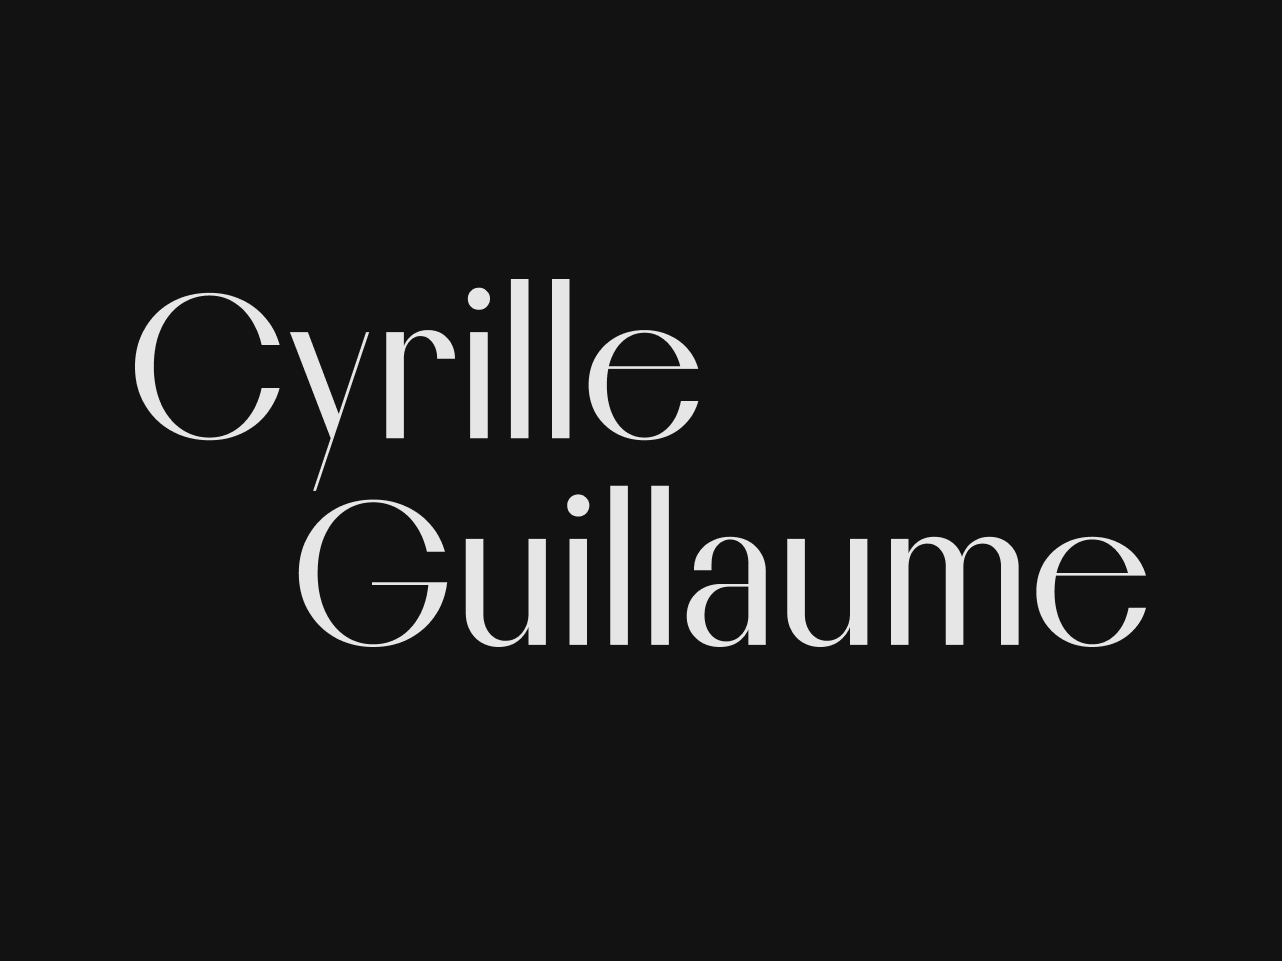 Cyrille Guillaume